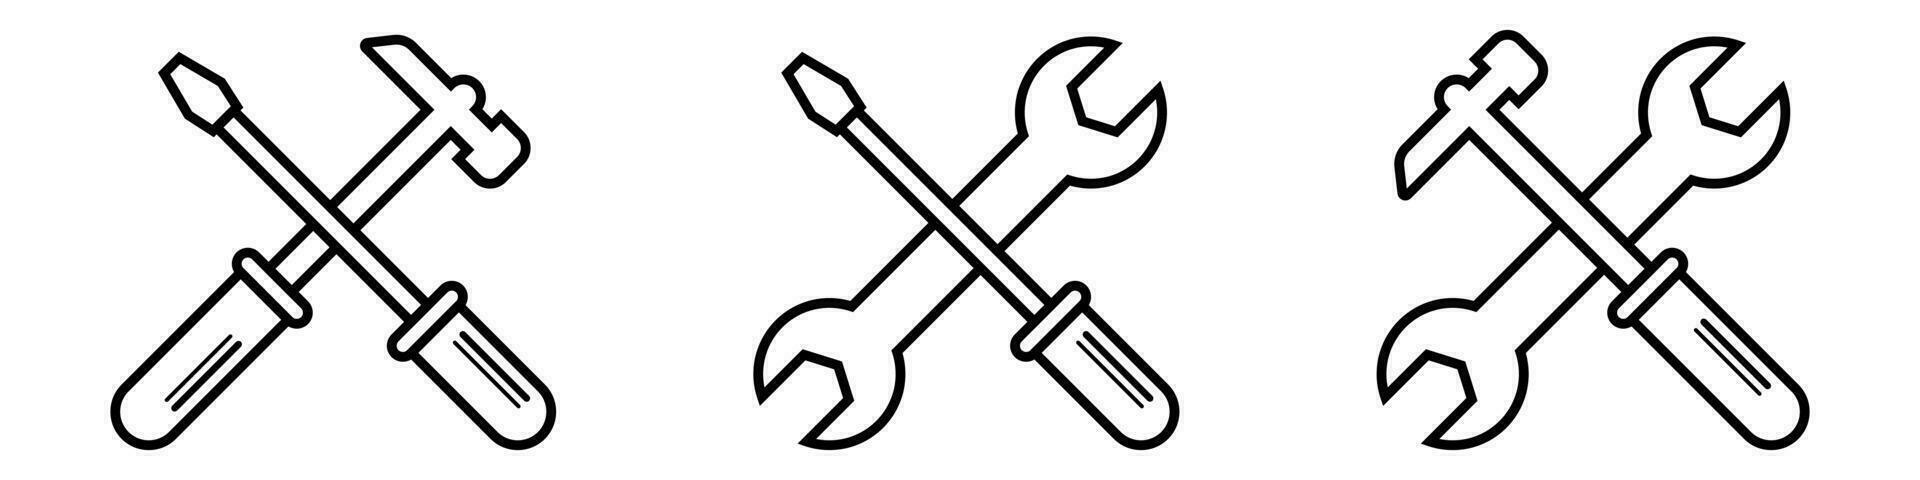 Outline repair service toolkit. Maintenance spanner and hammer silhouette icons. Isolated wrench and screwdriver symbols on white background. Settings pictogram. Vector EPS 10.